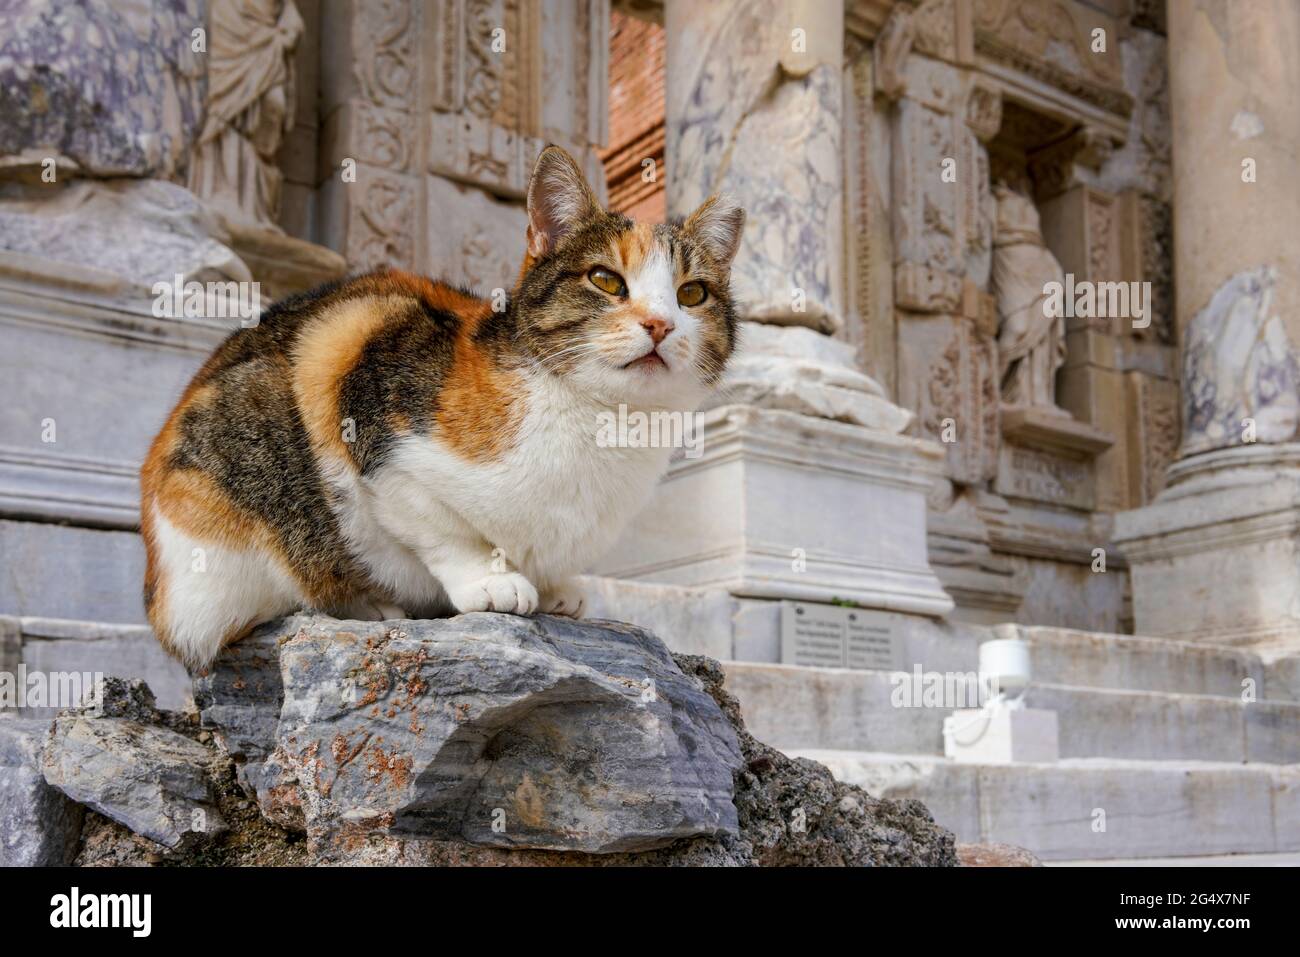 Cat sitting on stone outside ancient building Stock Photo